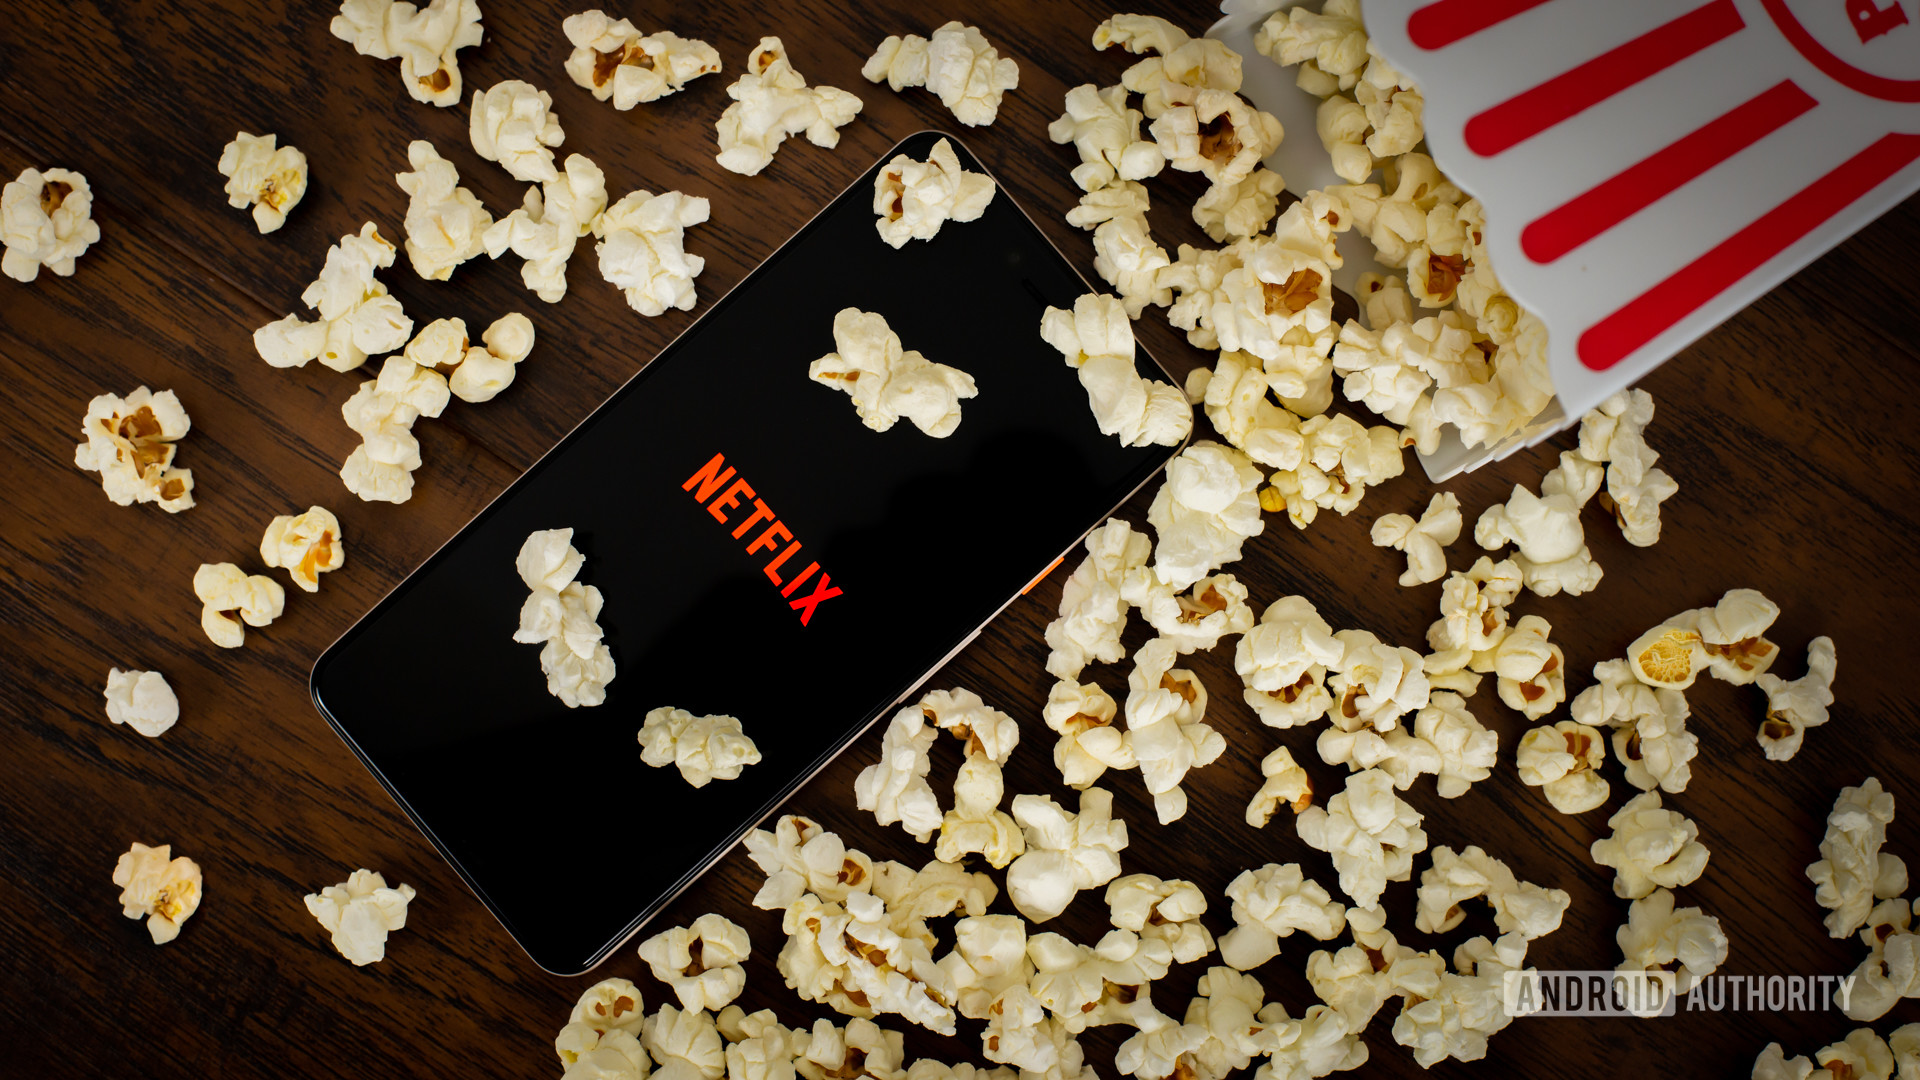 Netflix logo on a phone screen next to a spilled container of popcorn.